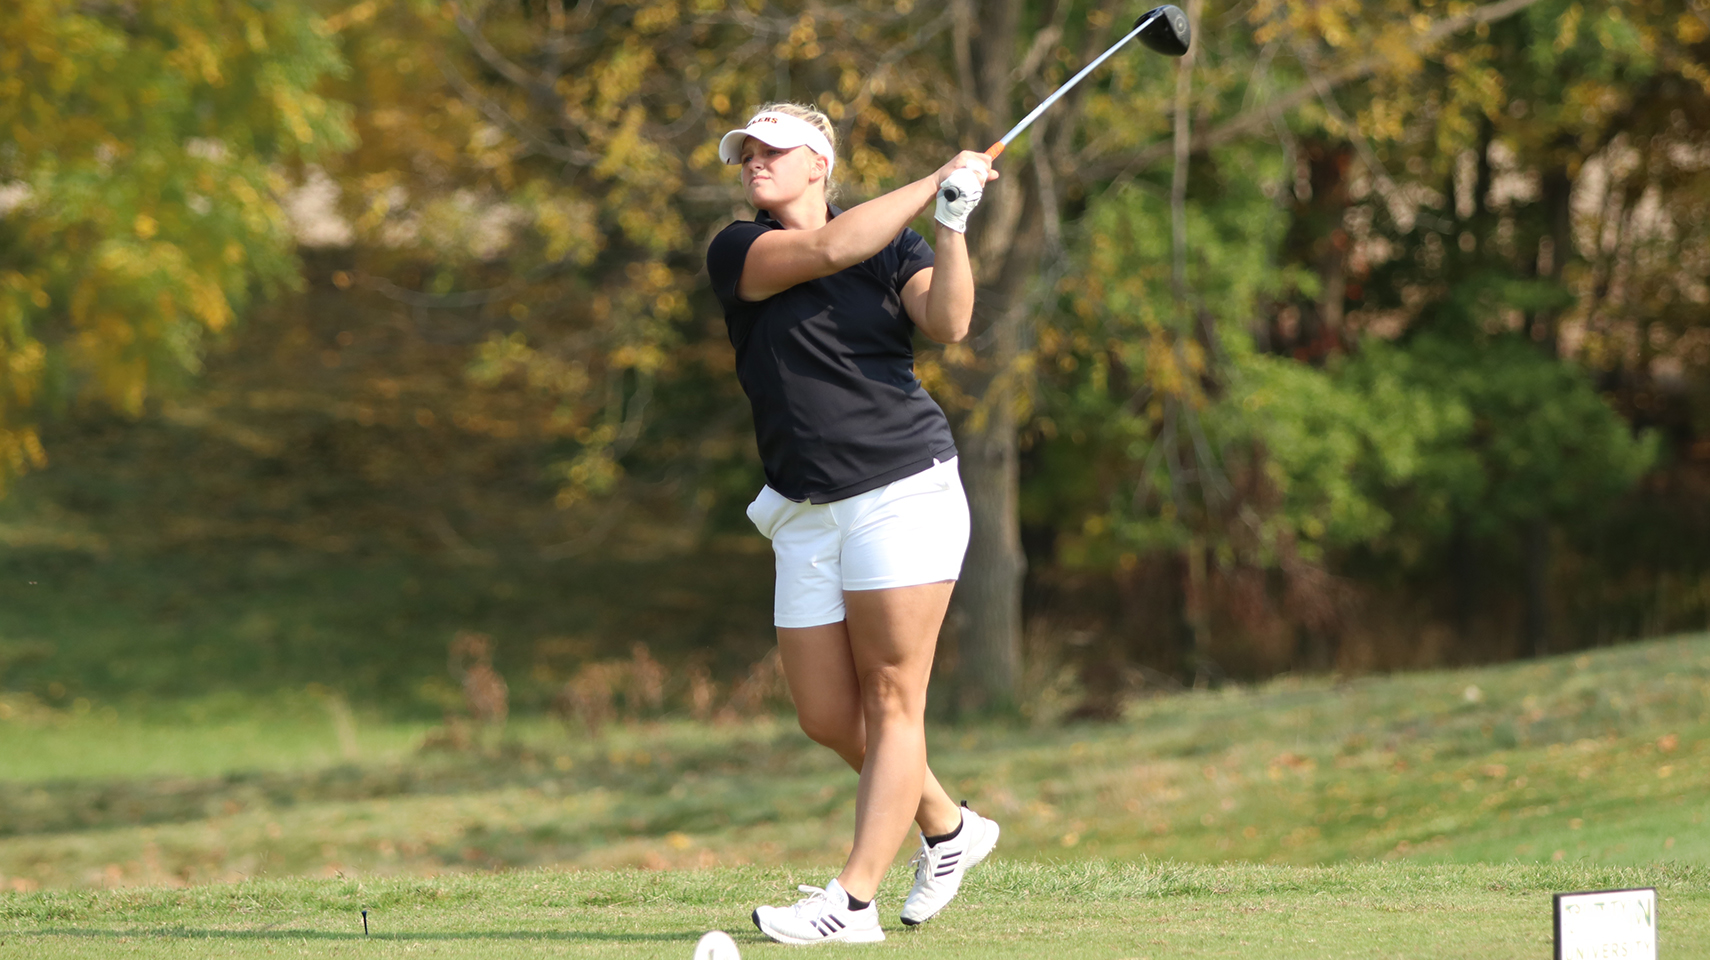 Women's golfer in black hitting the ball off the tee